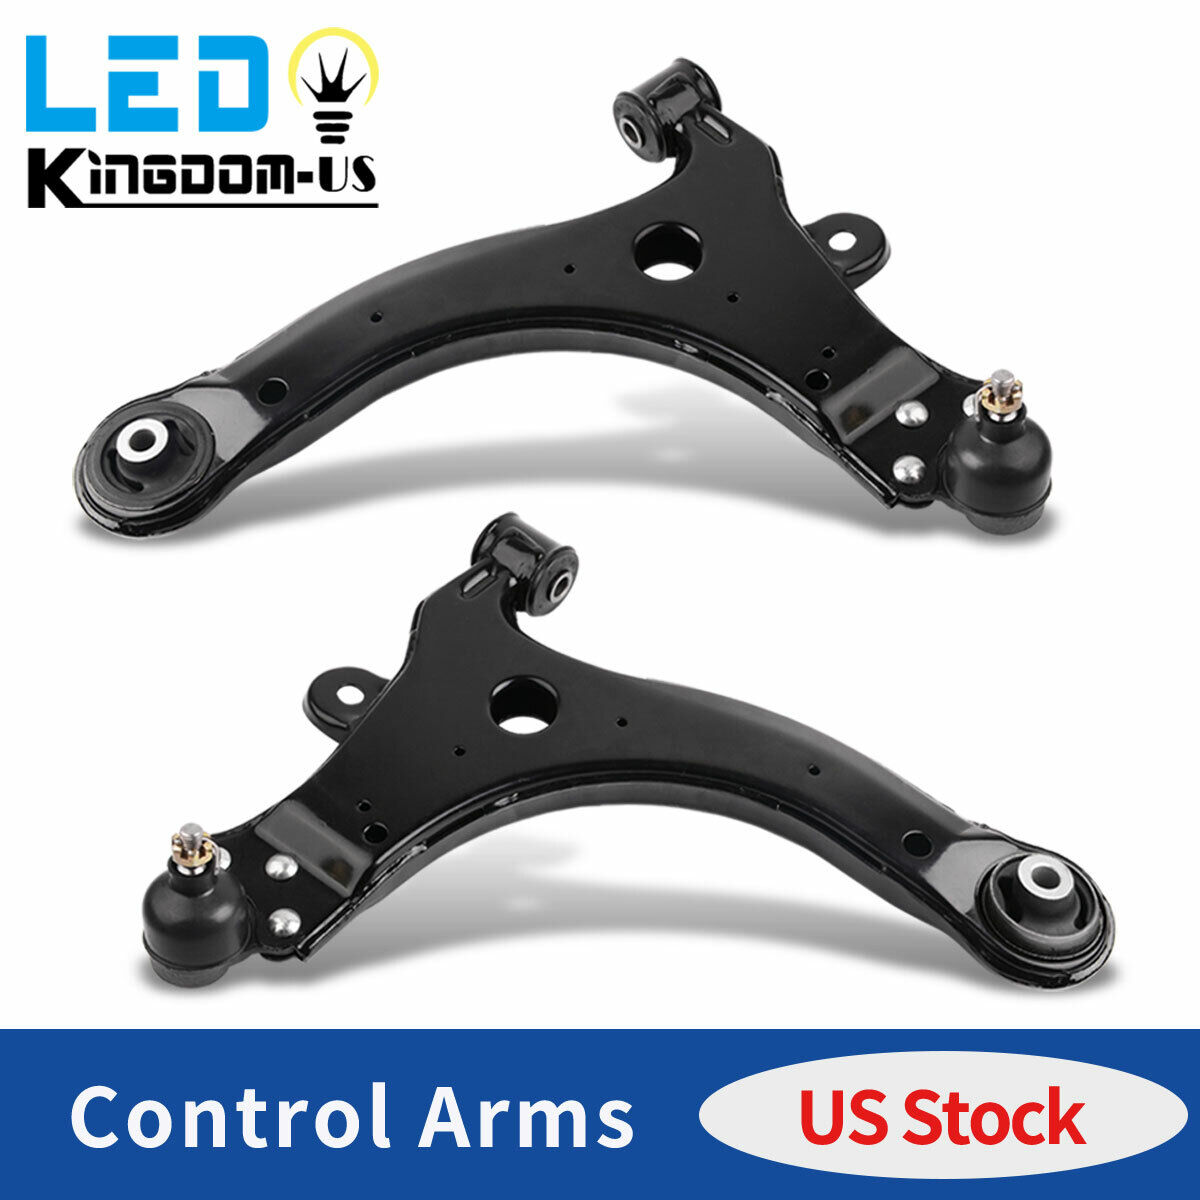 2x Front Lower Control Arms W/ Ball Joints for Chevy Impala Buick LaCrosse Regal